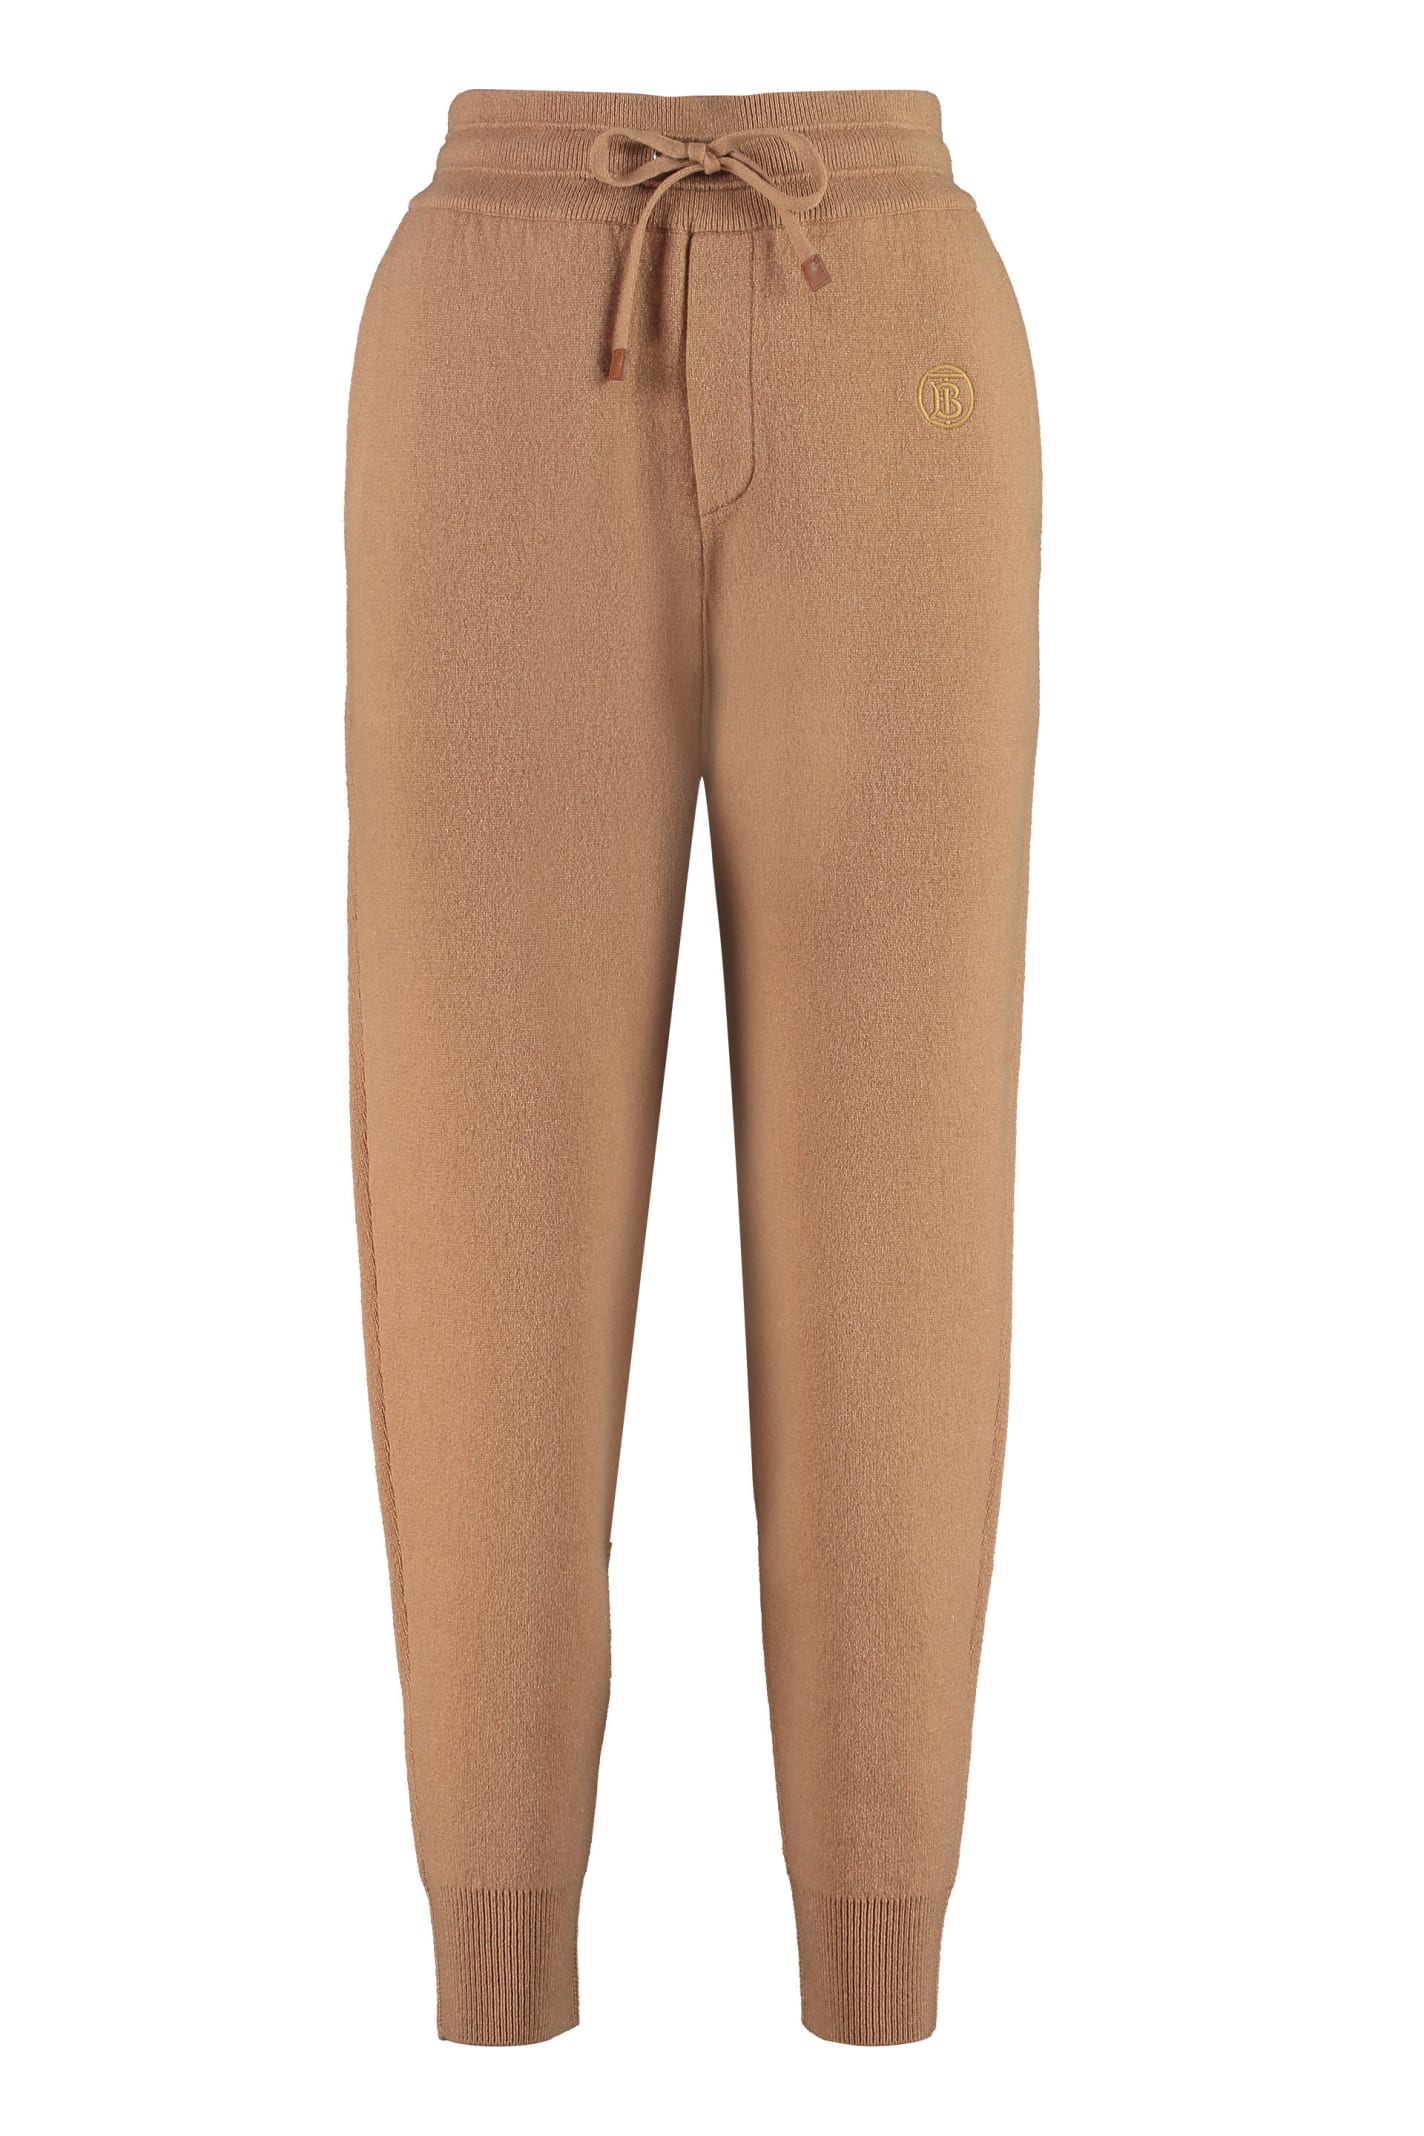 Burberry Knitted Cashmere Track-pants